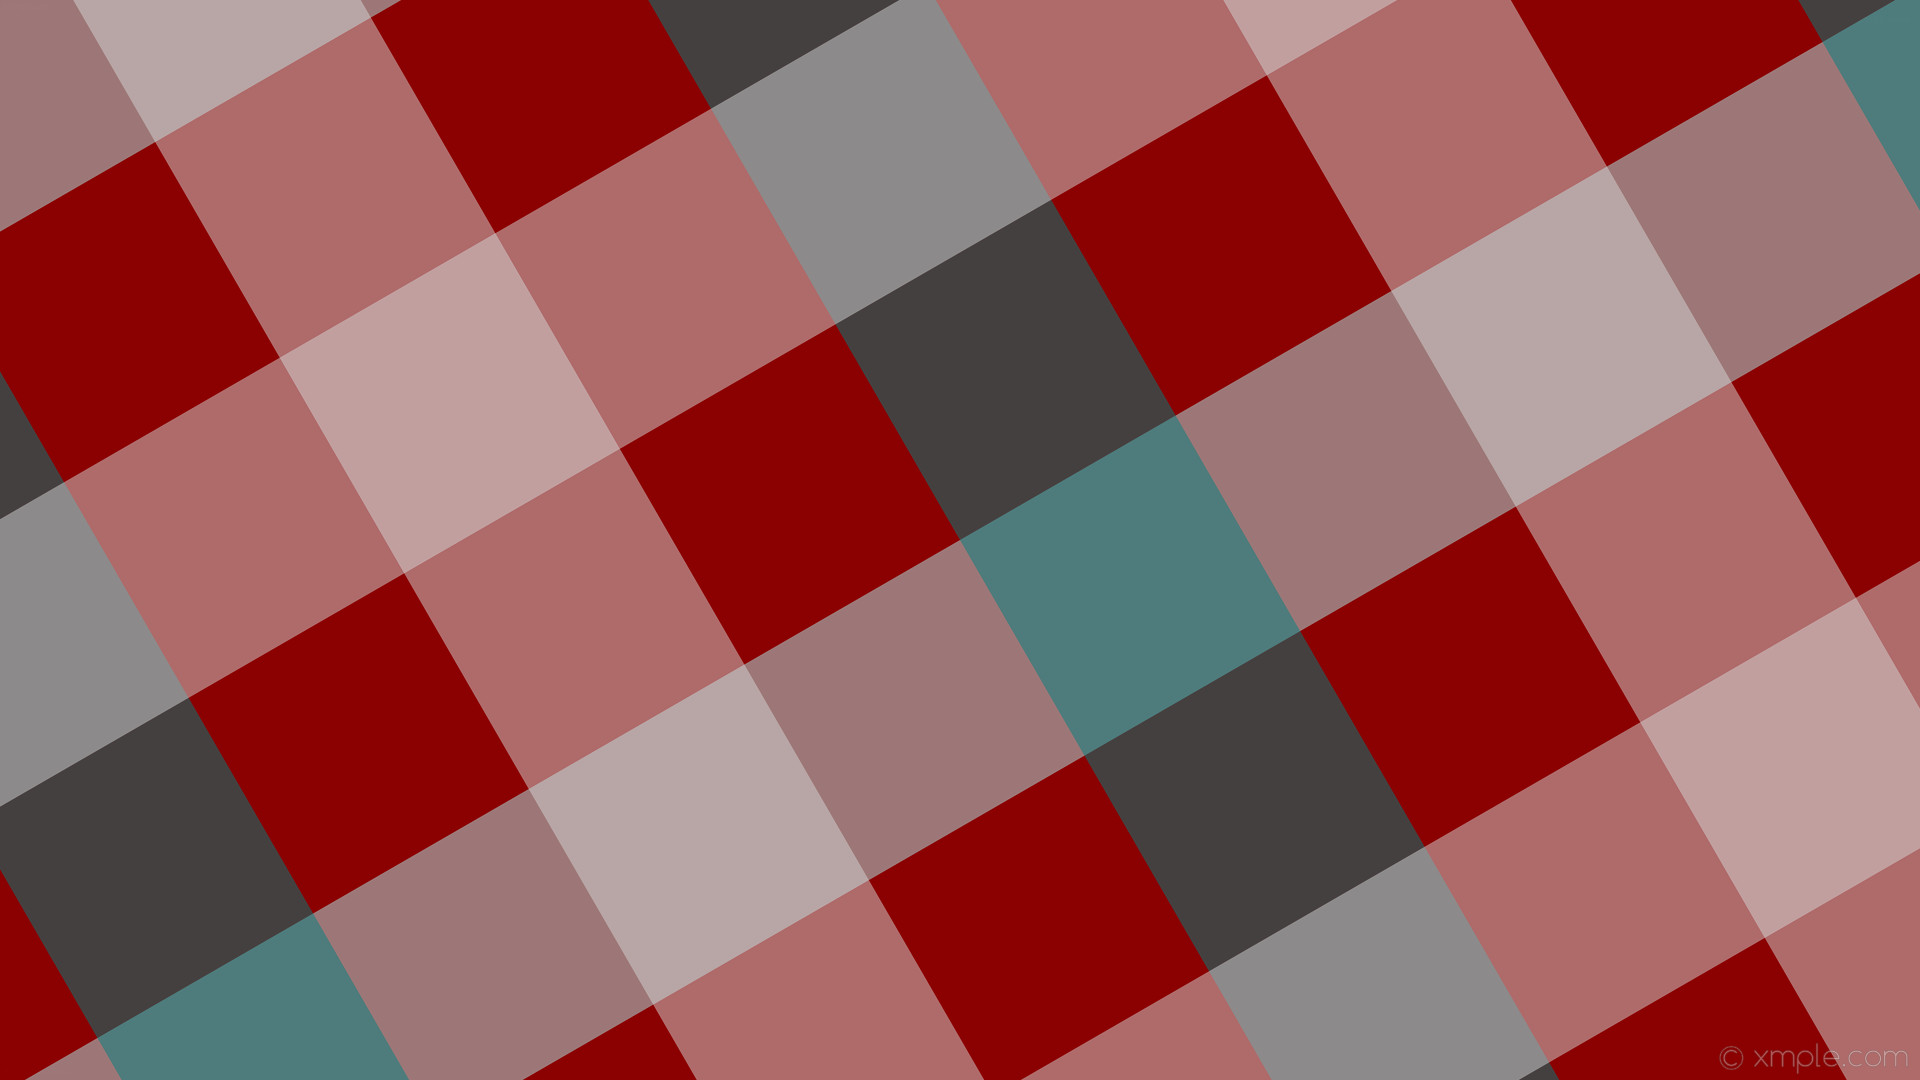 1920x1080 wallpaper blue red striped grey gingham quad green dark red pale turquoise  teal light gray #